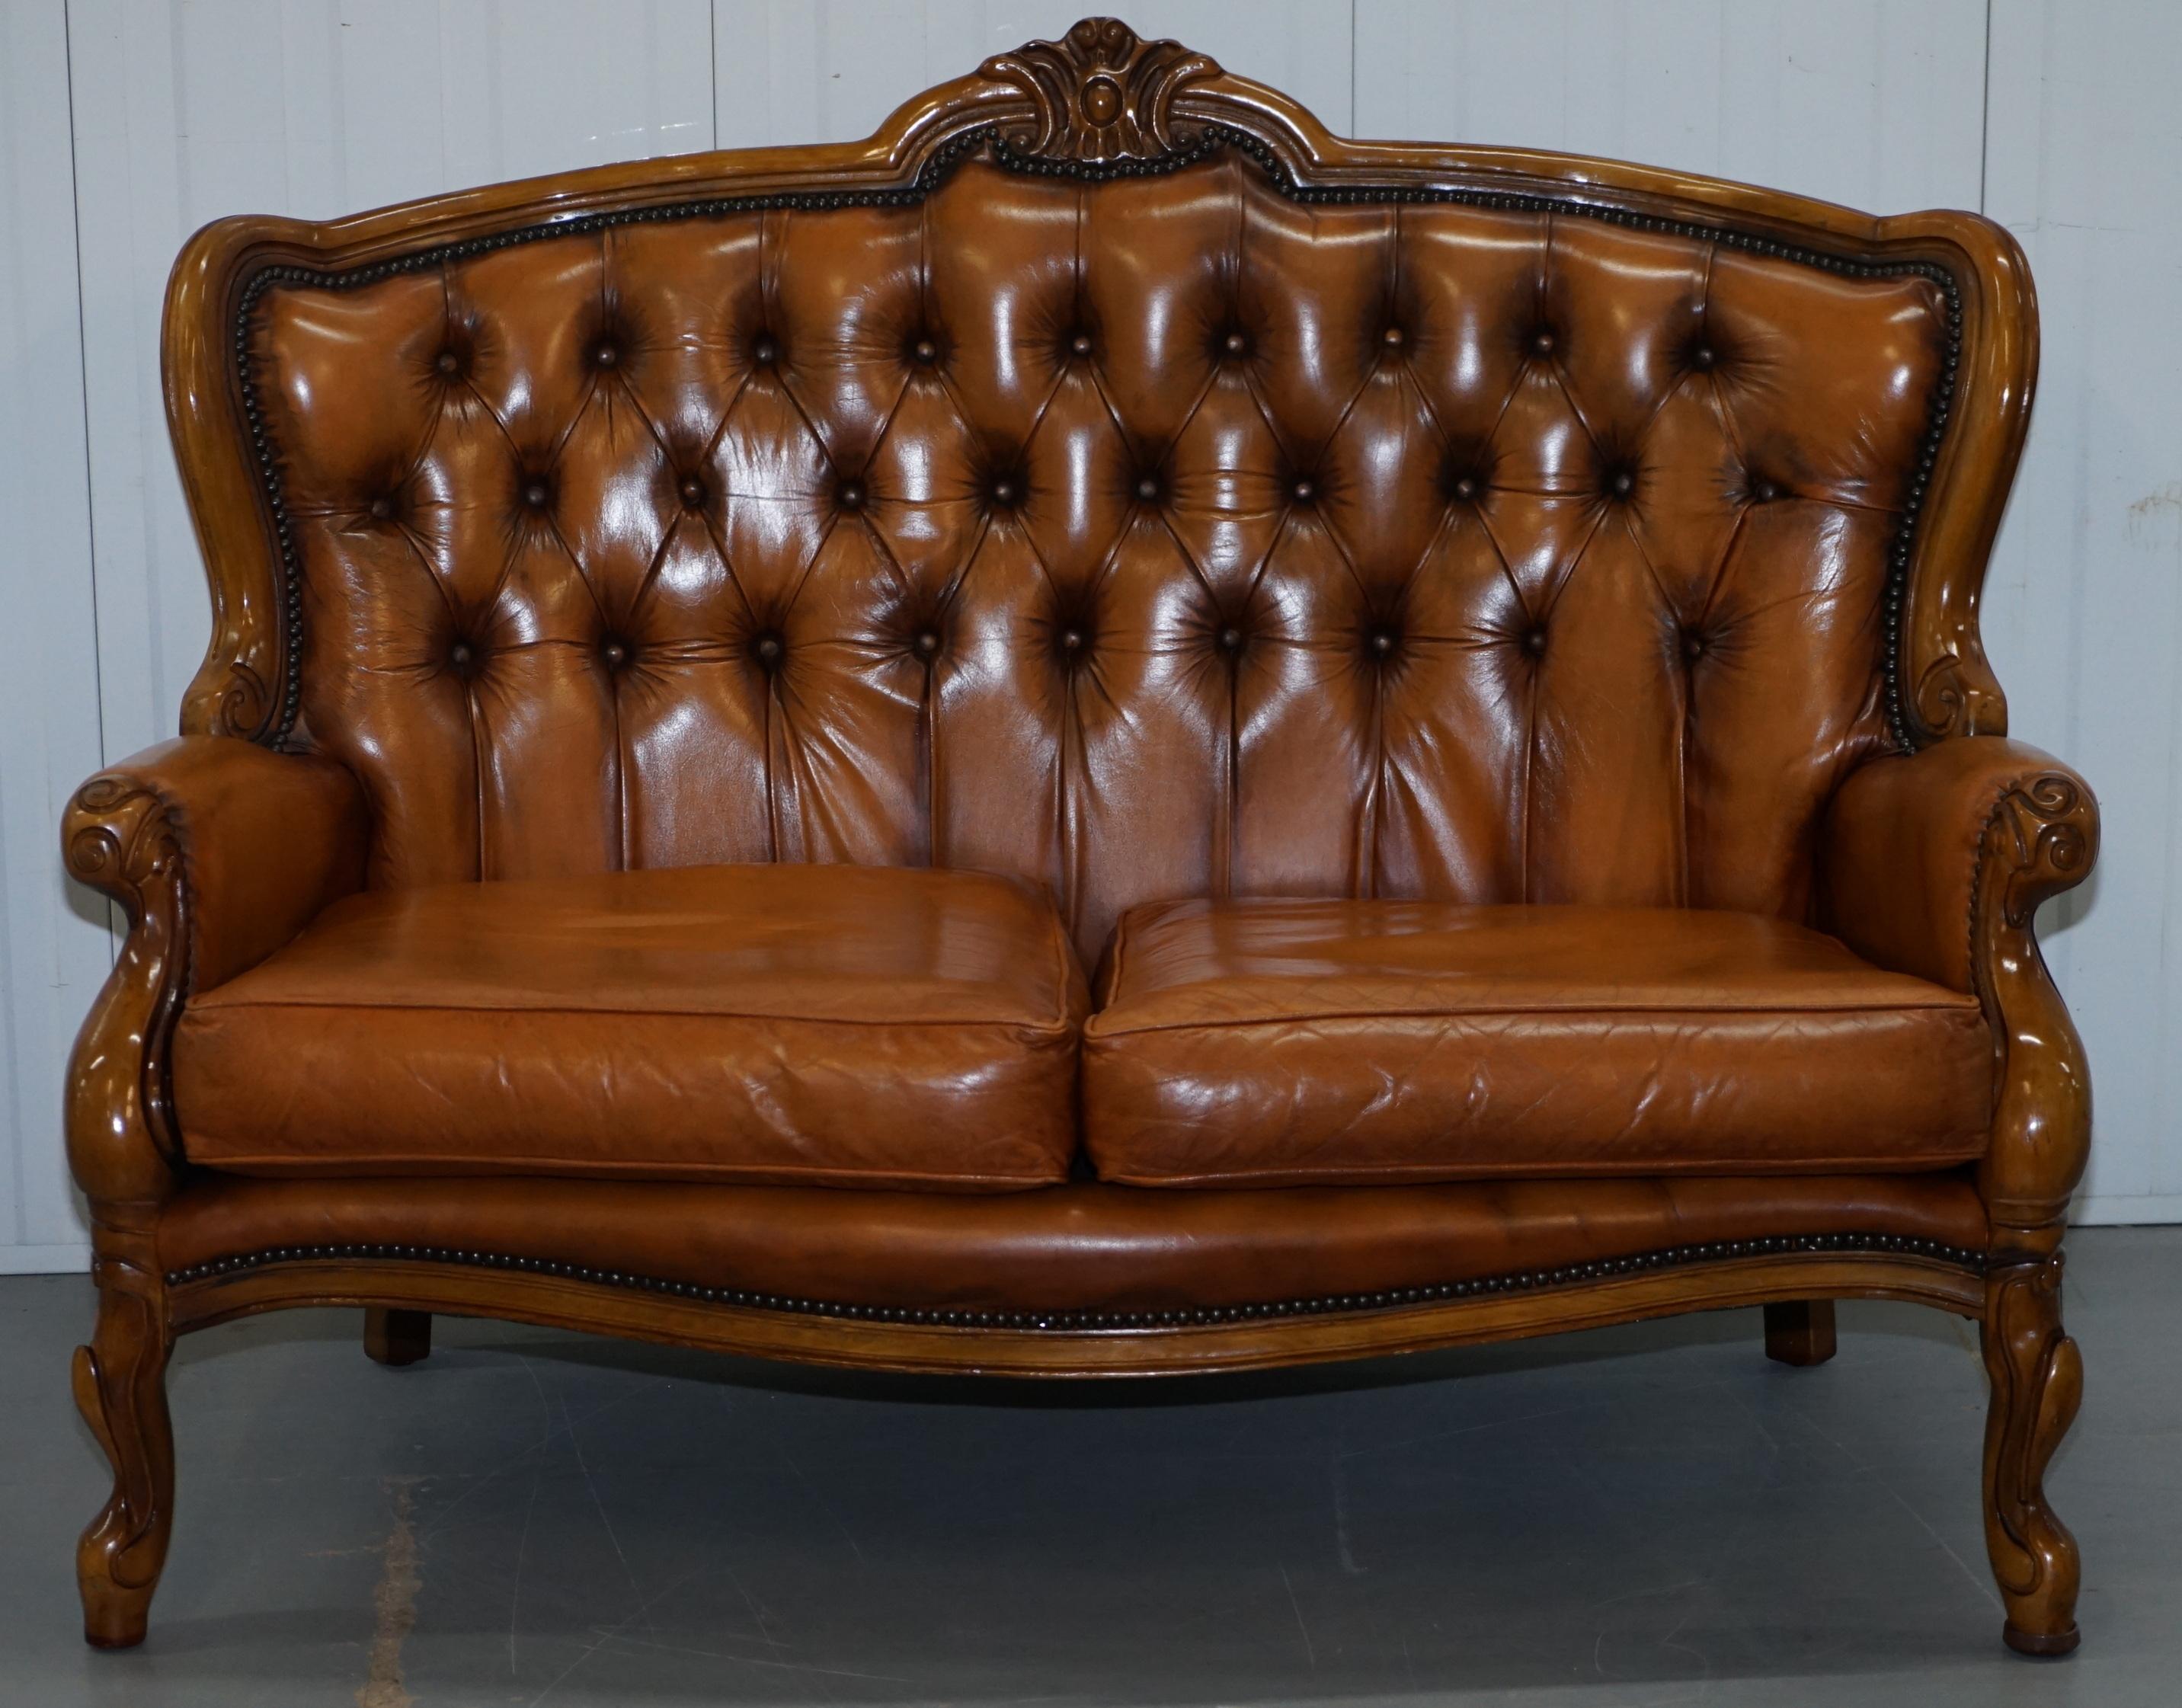 We are delighted to offer for sale this vintage aged tan brown leather French Chesterfield three piece suite 

A good looking well made and decorative set in good vintage Mid-Century Modern condition. This suite dates from the 1950s-1970s which is